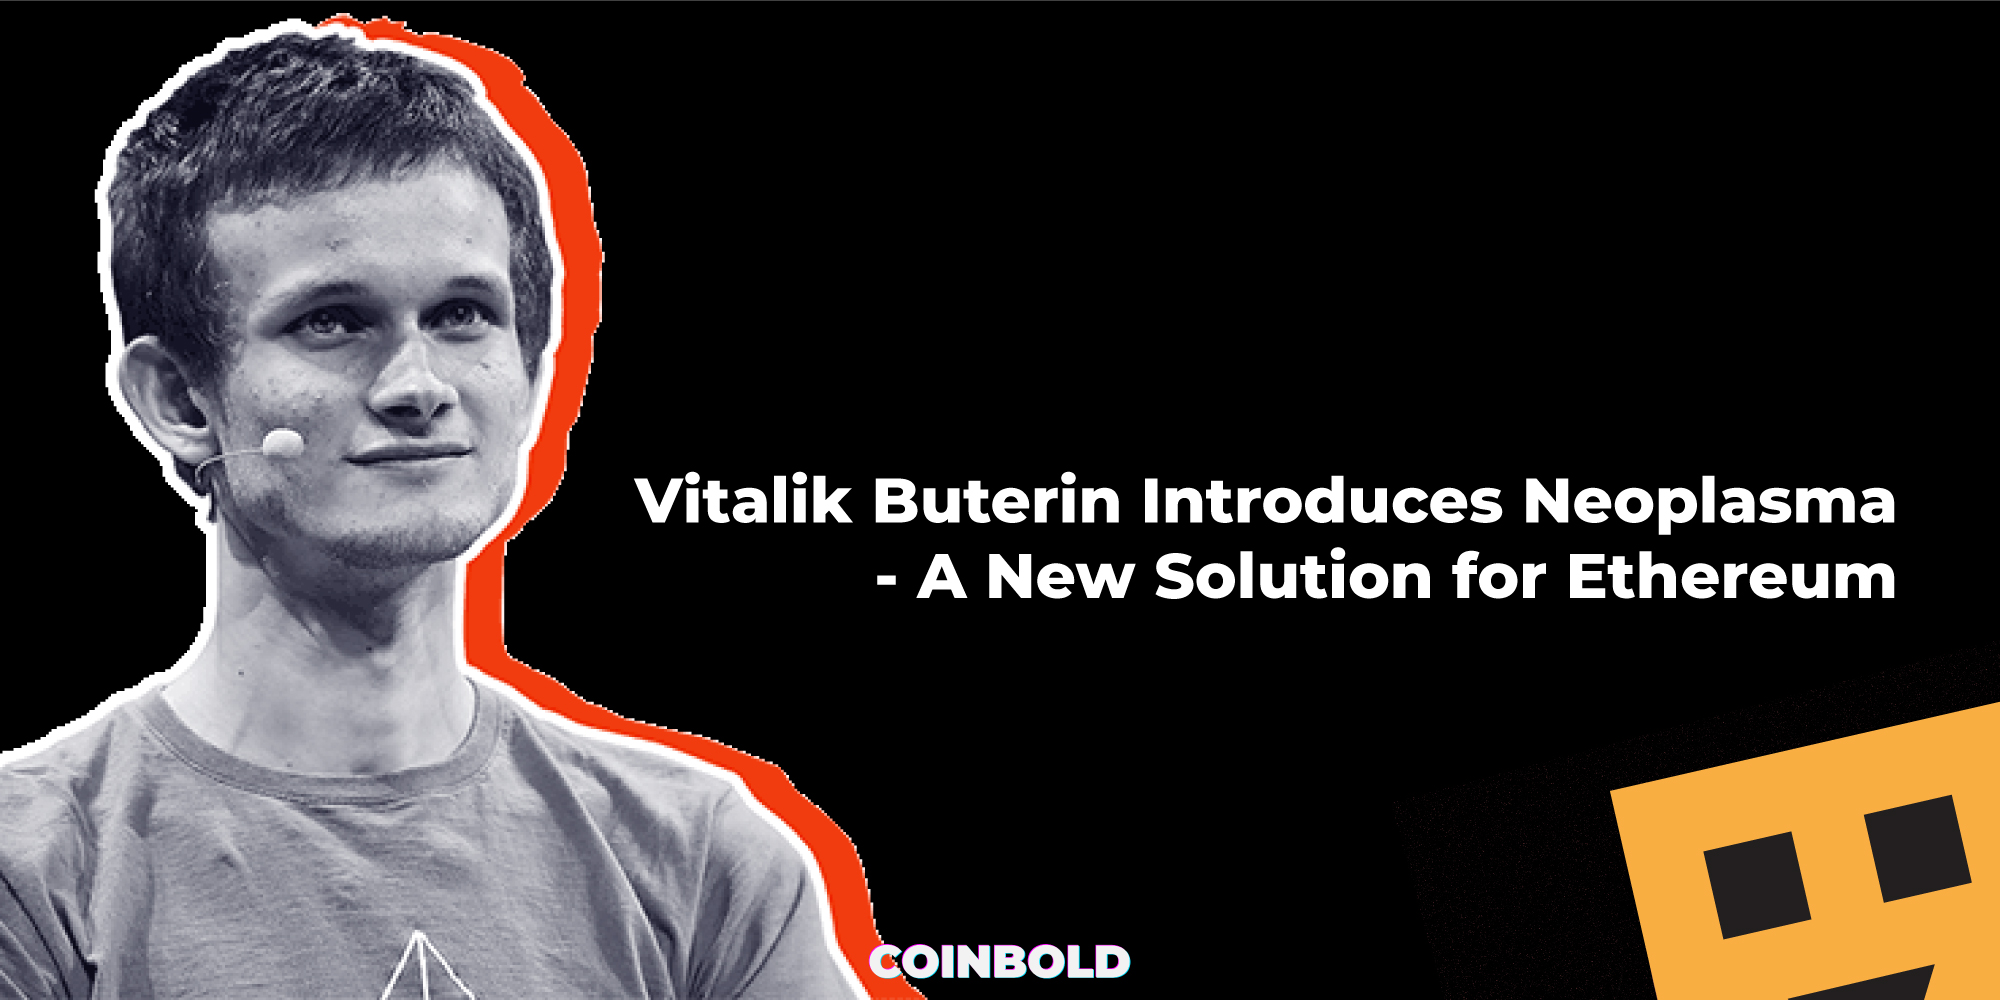 Vitalik Buterin Introduces Neoplasma A New Solution for Ethereum